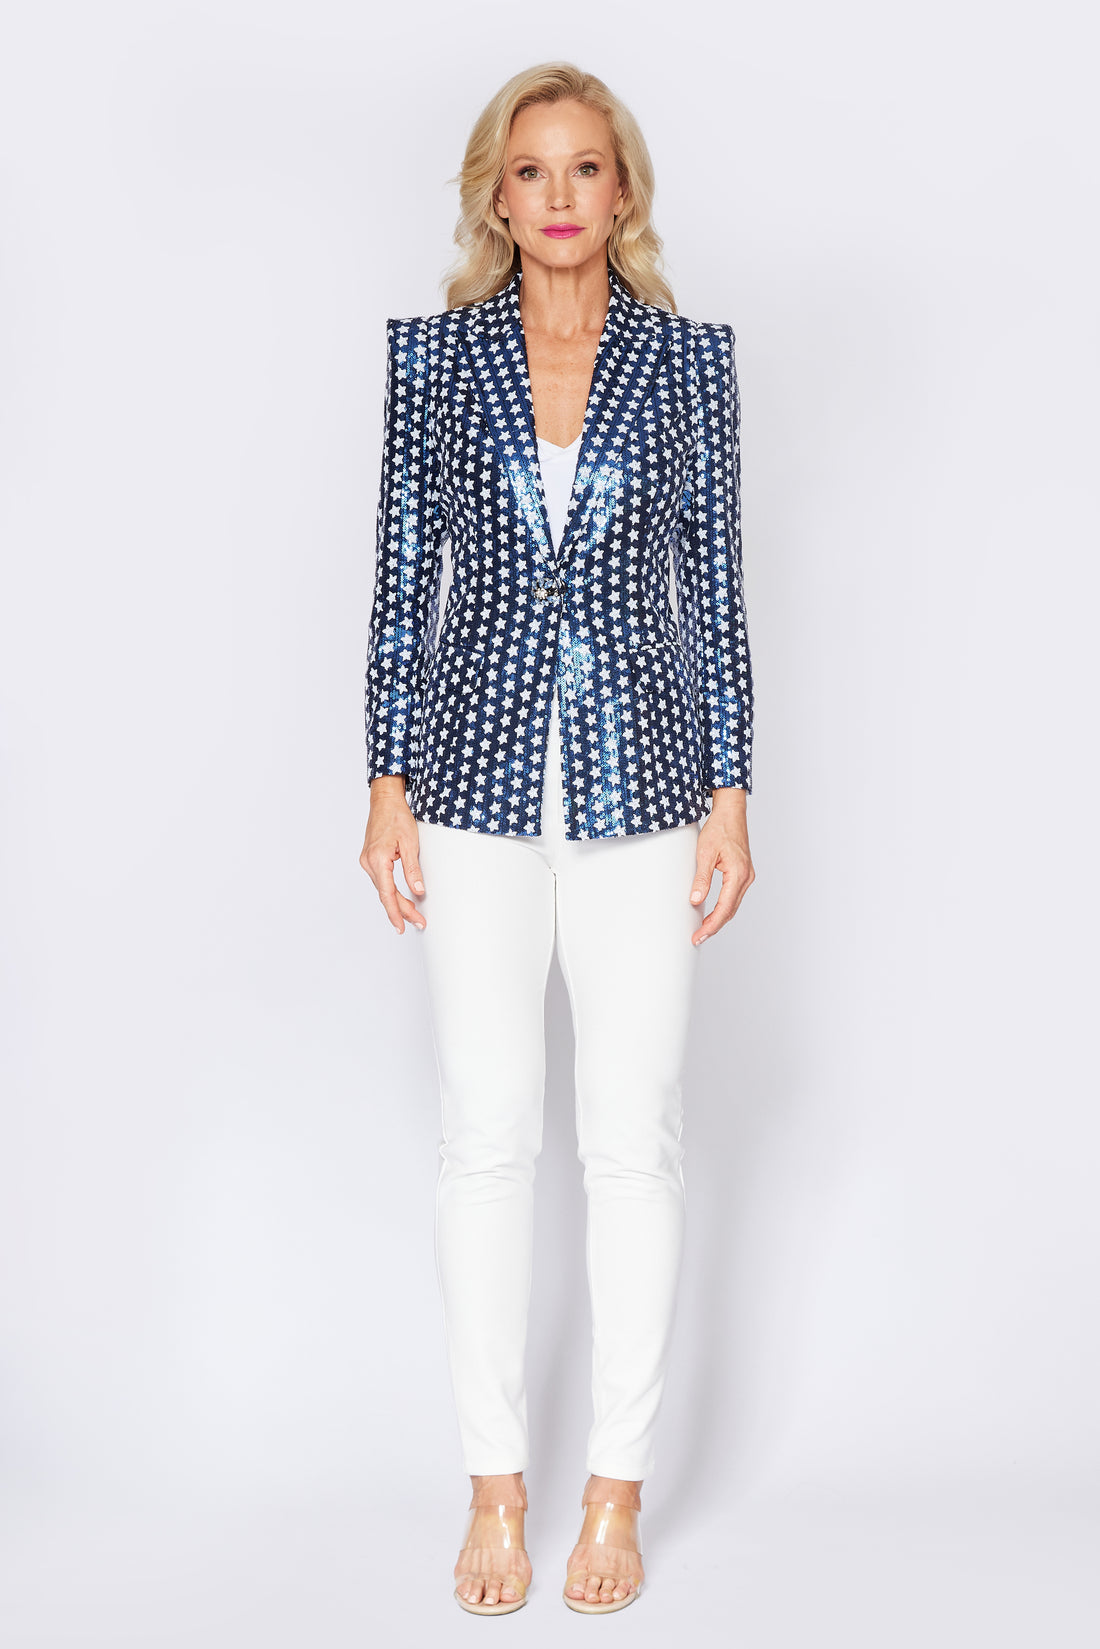 Navy and White Sequin Star Jacket - SOLD OUT